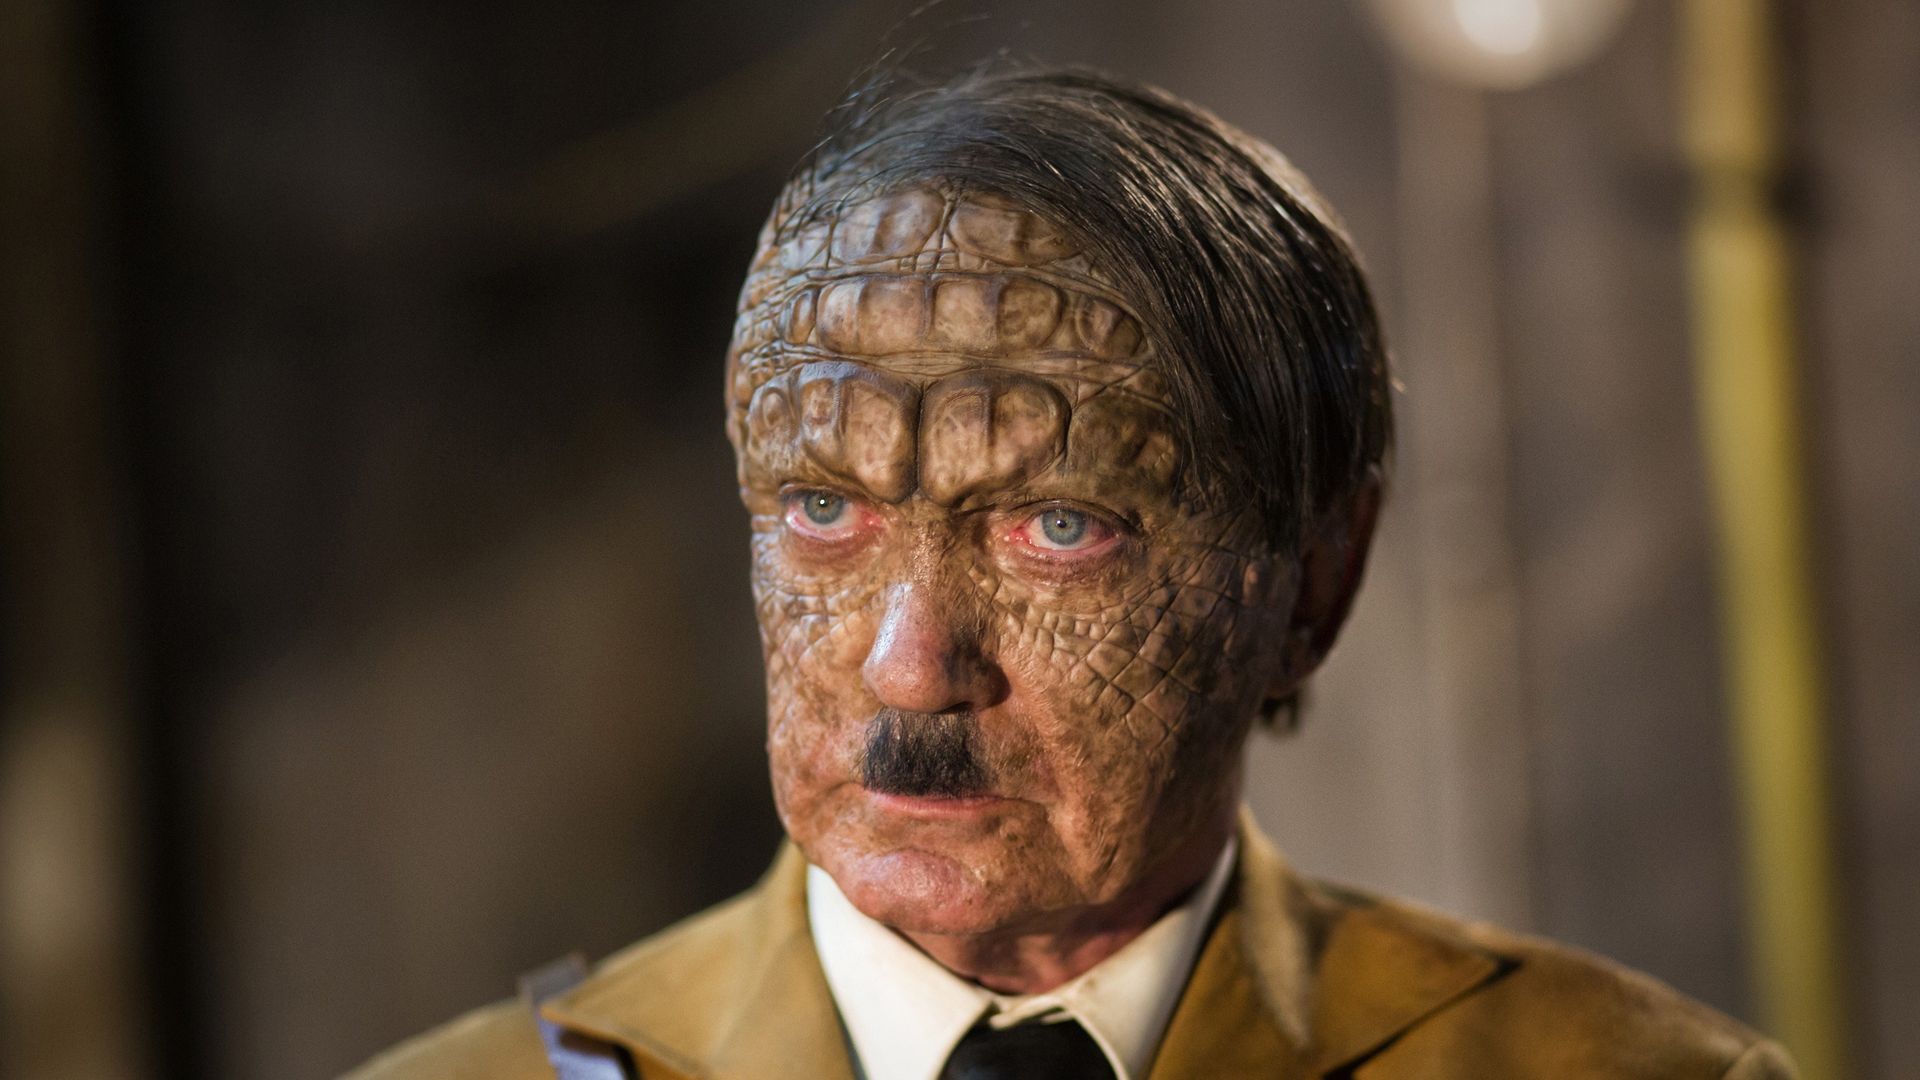 Iron Sky: The Coming Race Backdrop